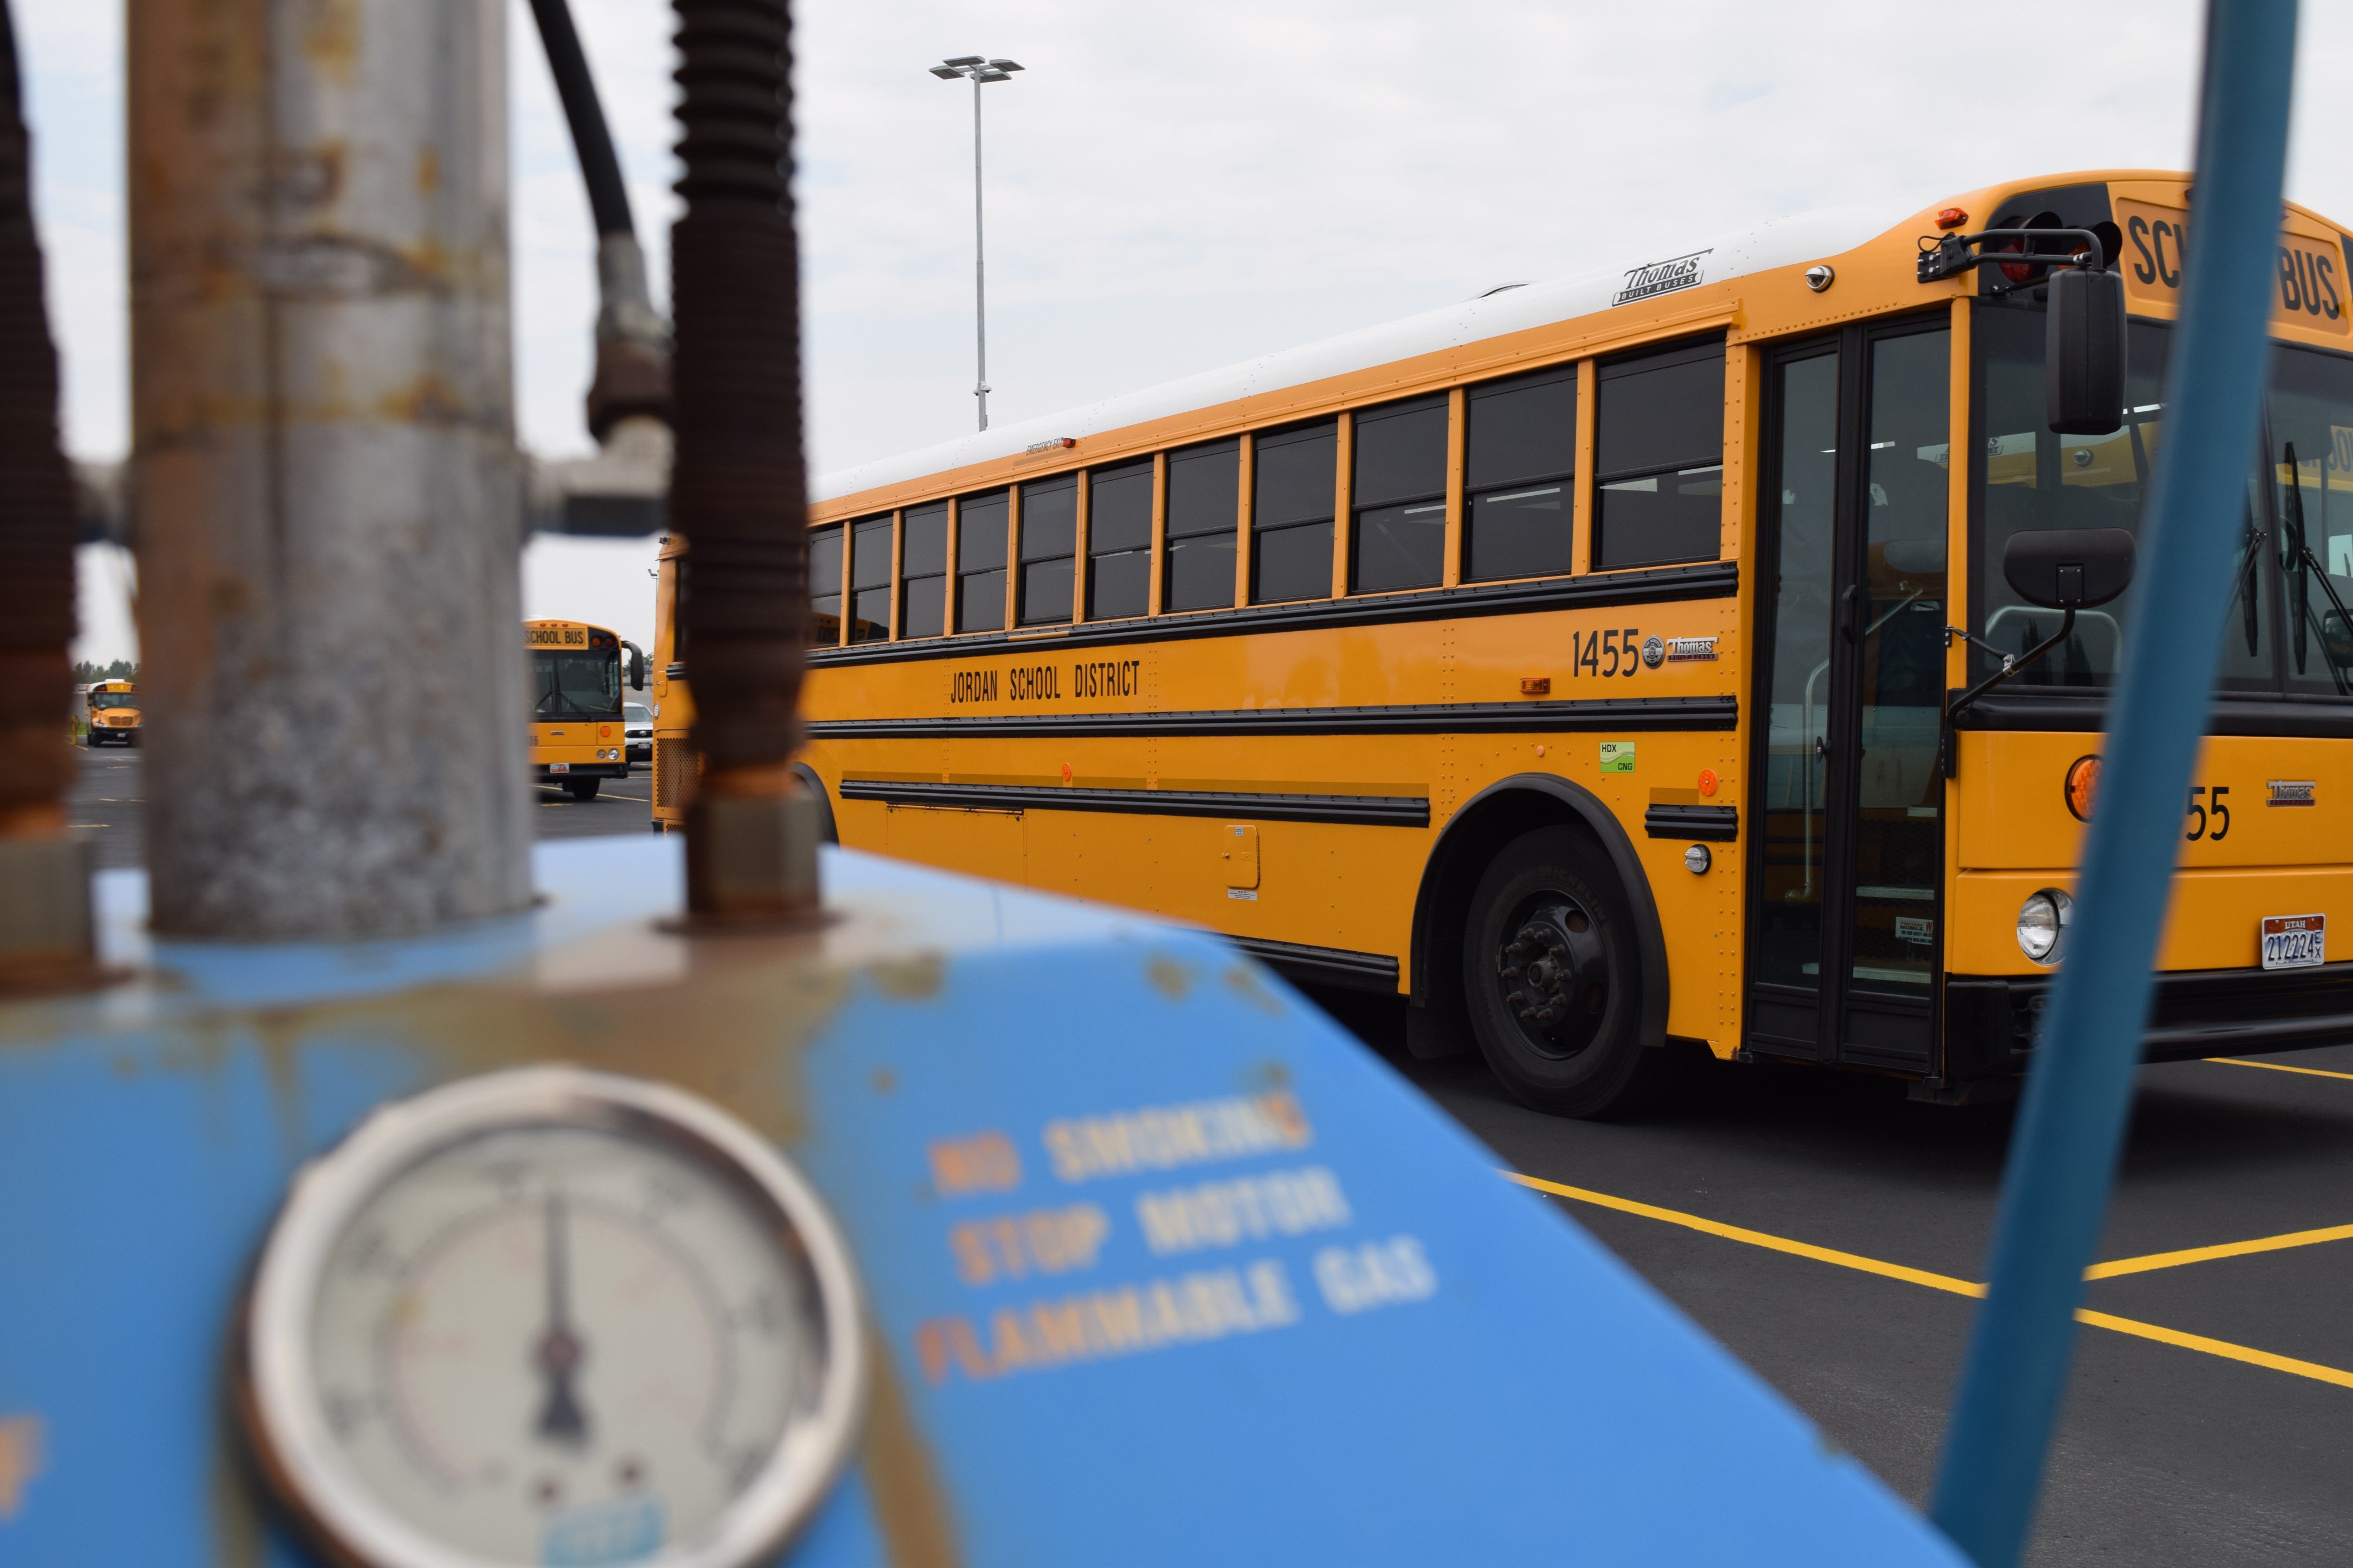 Aburrir Ofensa mando Jordan District on Twitter: "FUN FACT FRIDAY: Jordan School District has  the largest fleet of CNG school buses in the State, and that is adding up  to big savings. The District pays .